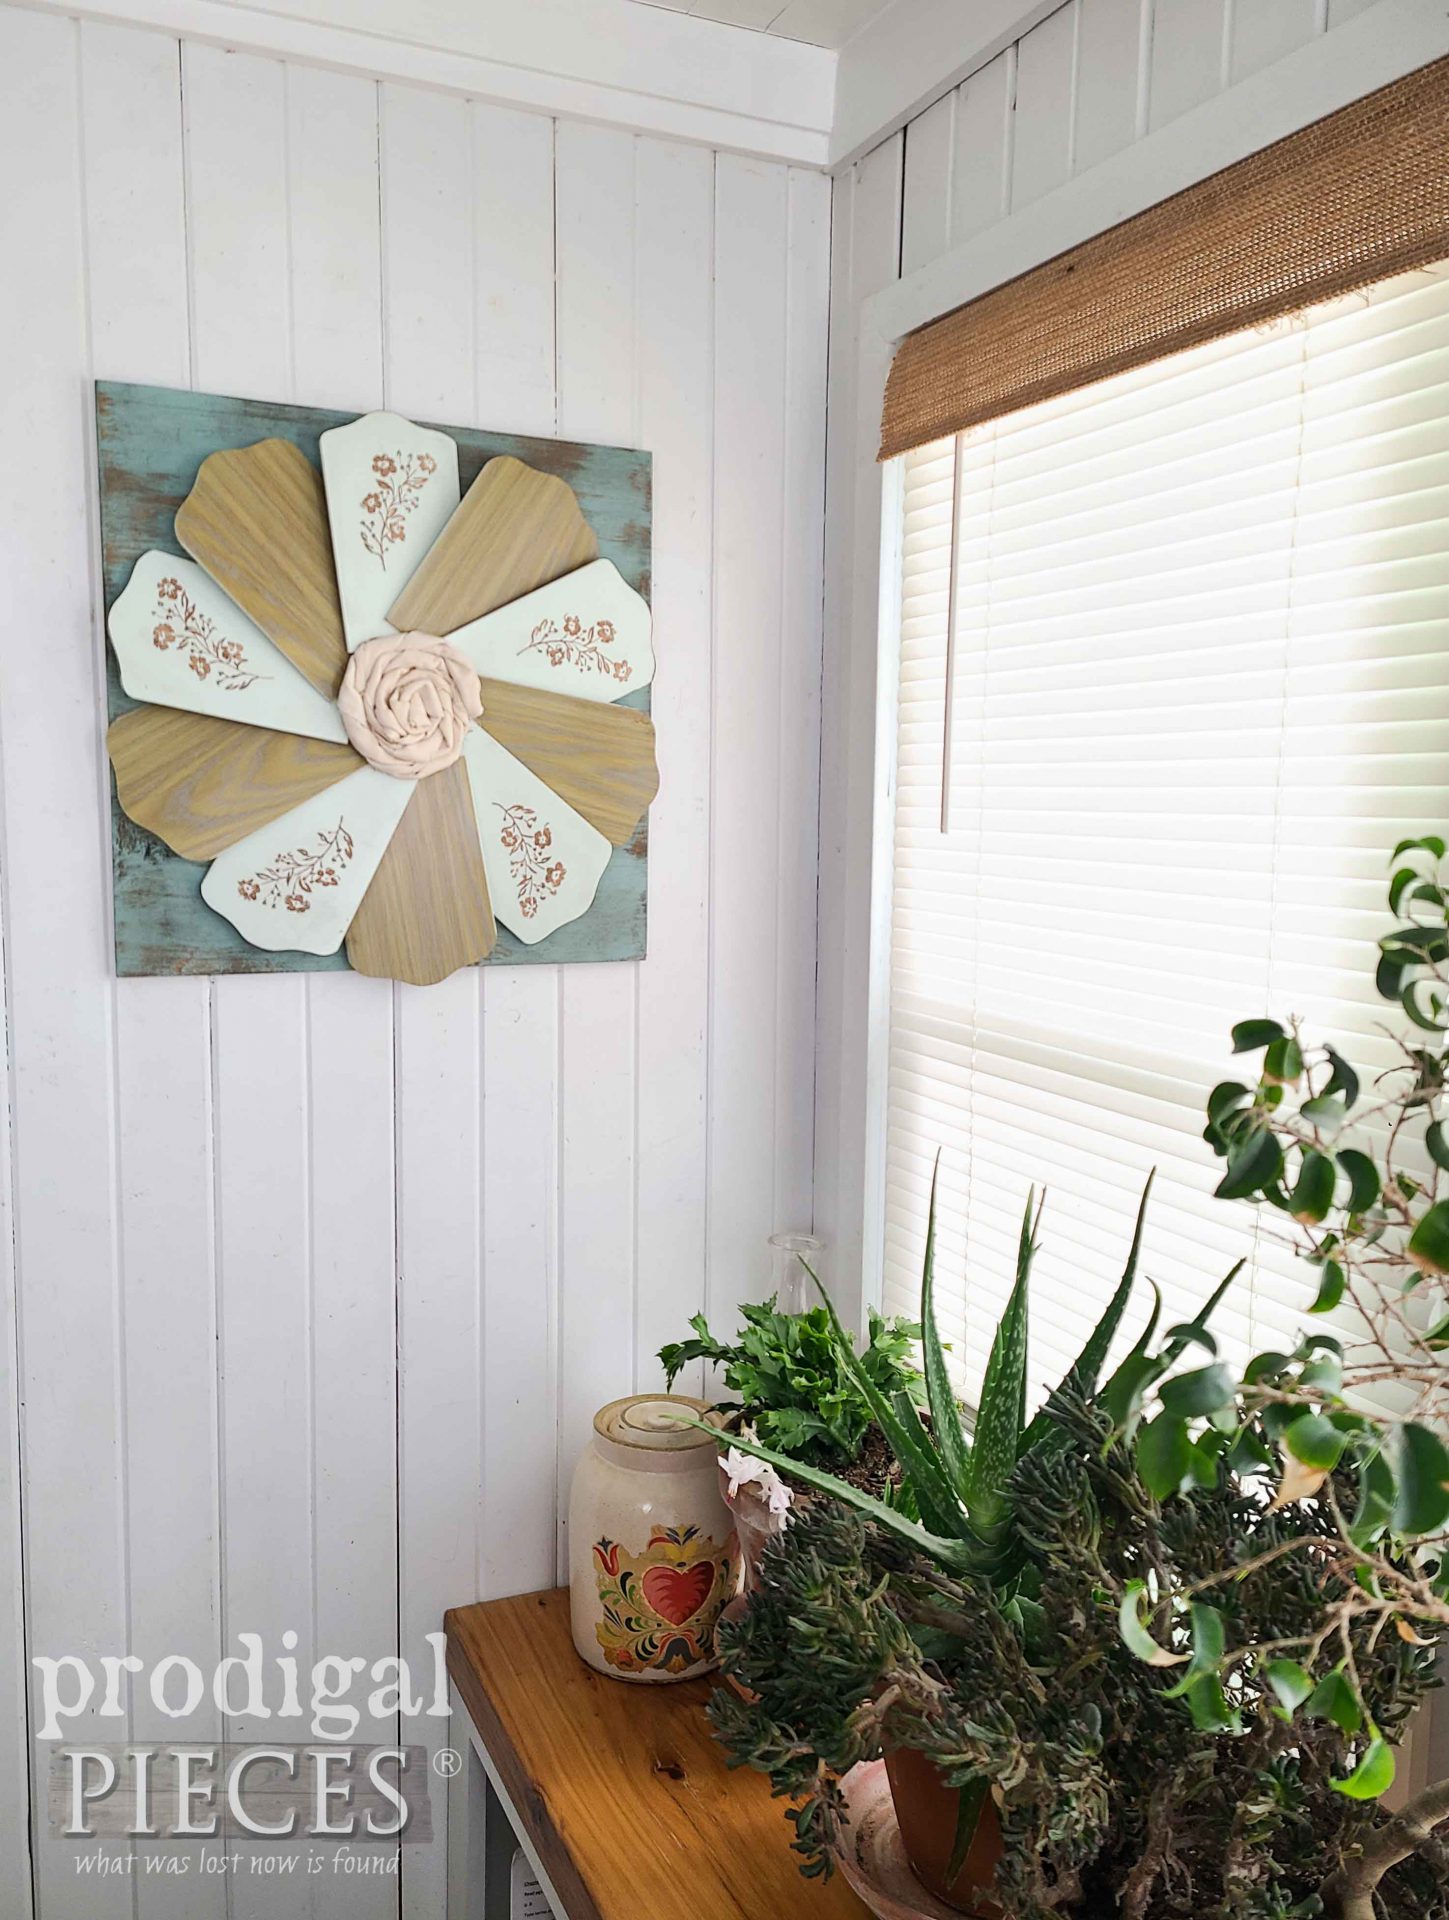 Repurposed Ceiling Fan Art from Ceiling Fan Blades by Larissa of Prodigal Pieces | prodigalpieces.com #prodigalpieces #repurposed #diy #homedecor